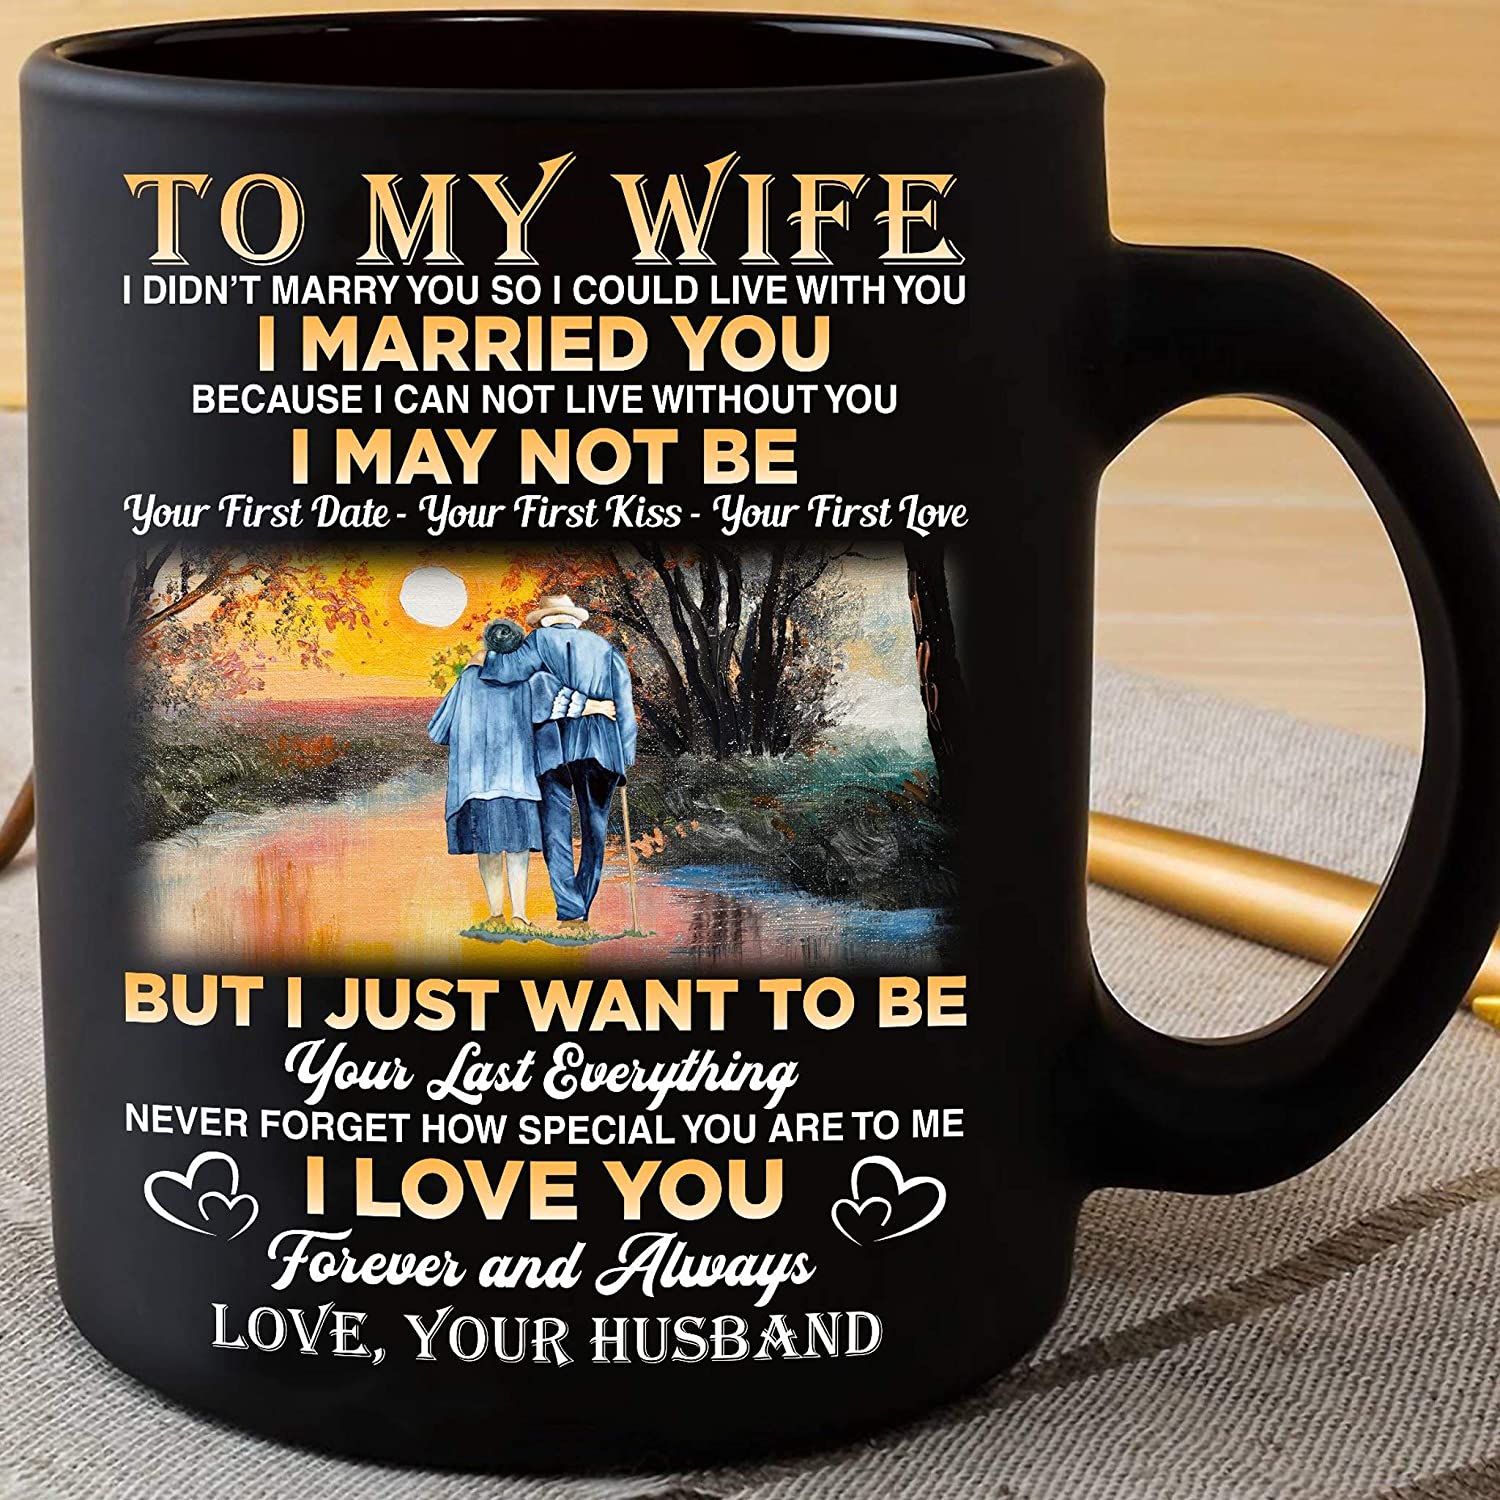 Accent, To My Wife From Husband Mug – For Couple on Anniversary (Black)